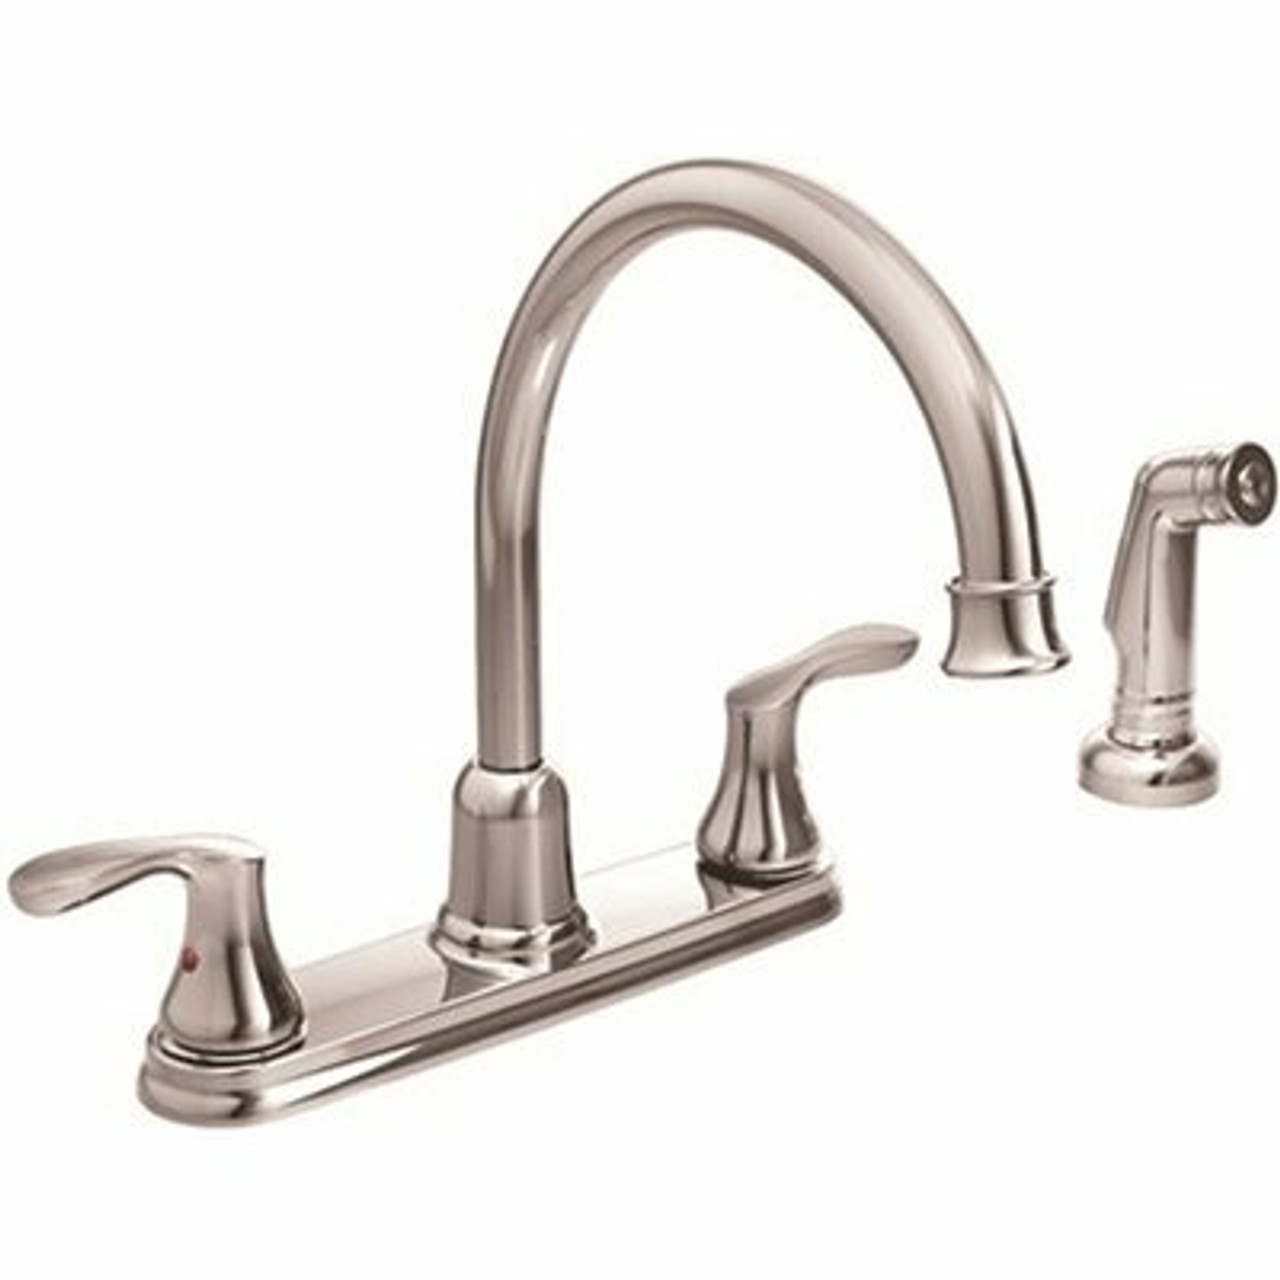 Cleveland Faucet Group Cornerstone 2-Handle Standard Kitchen Faucet In Chrome - 2496187